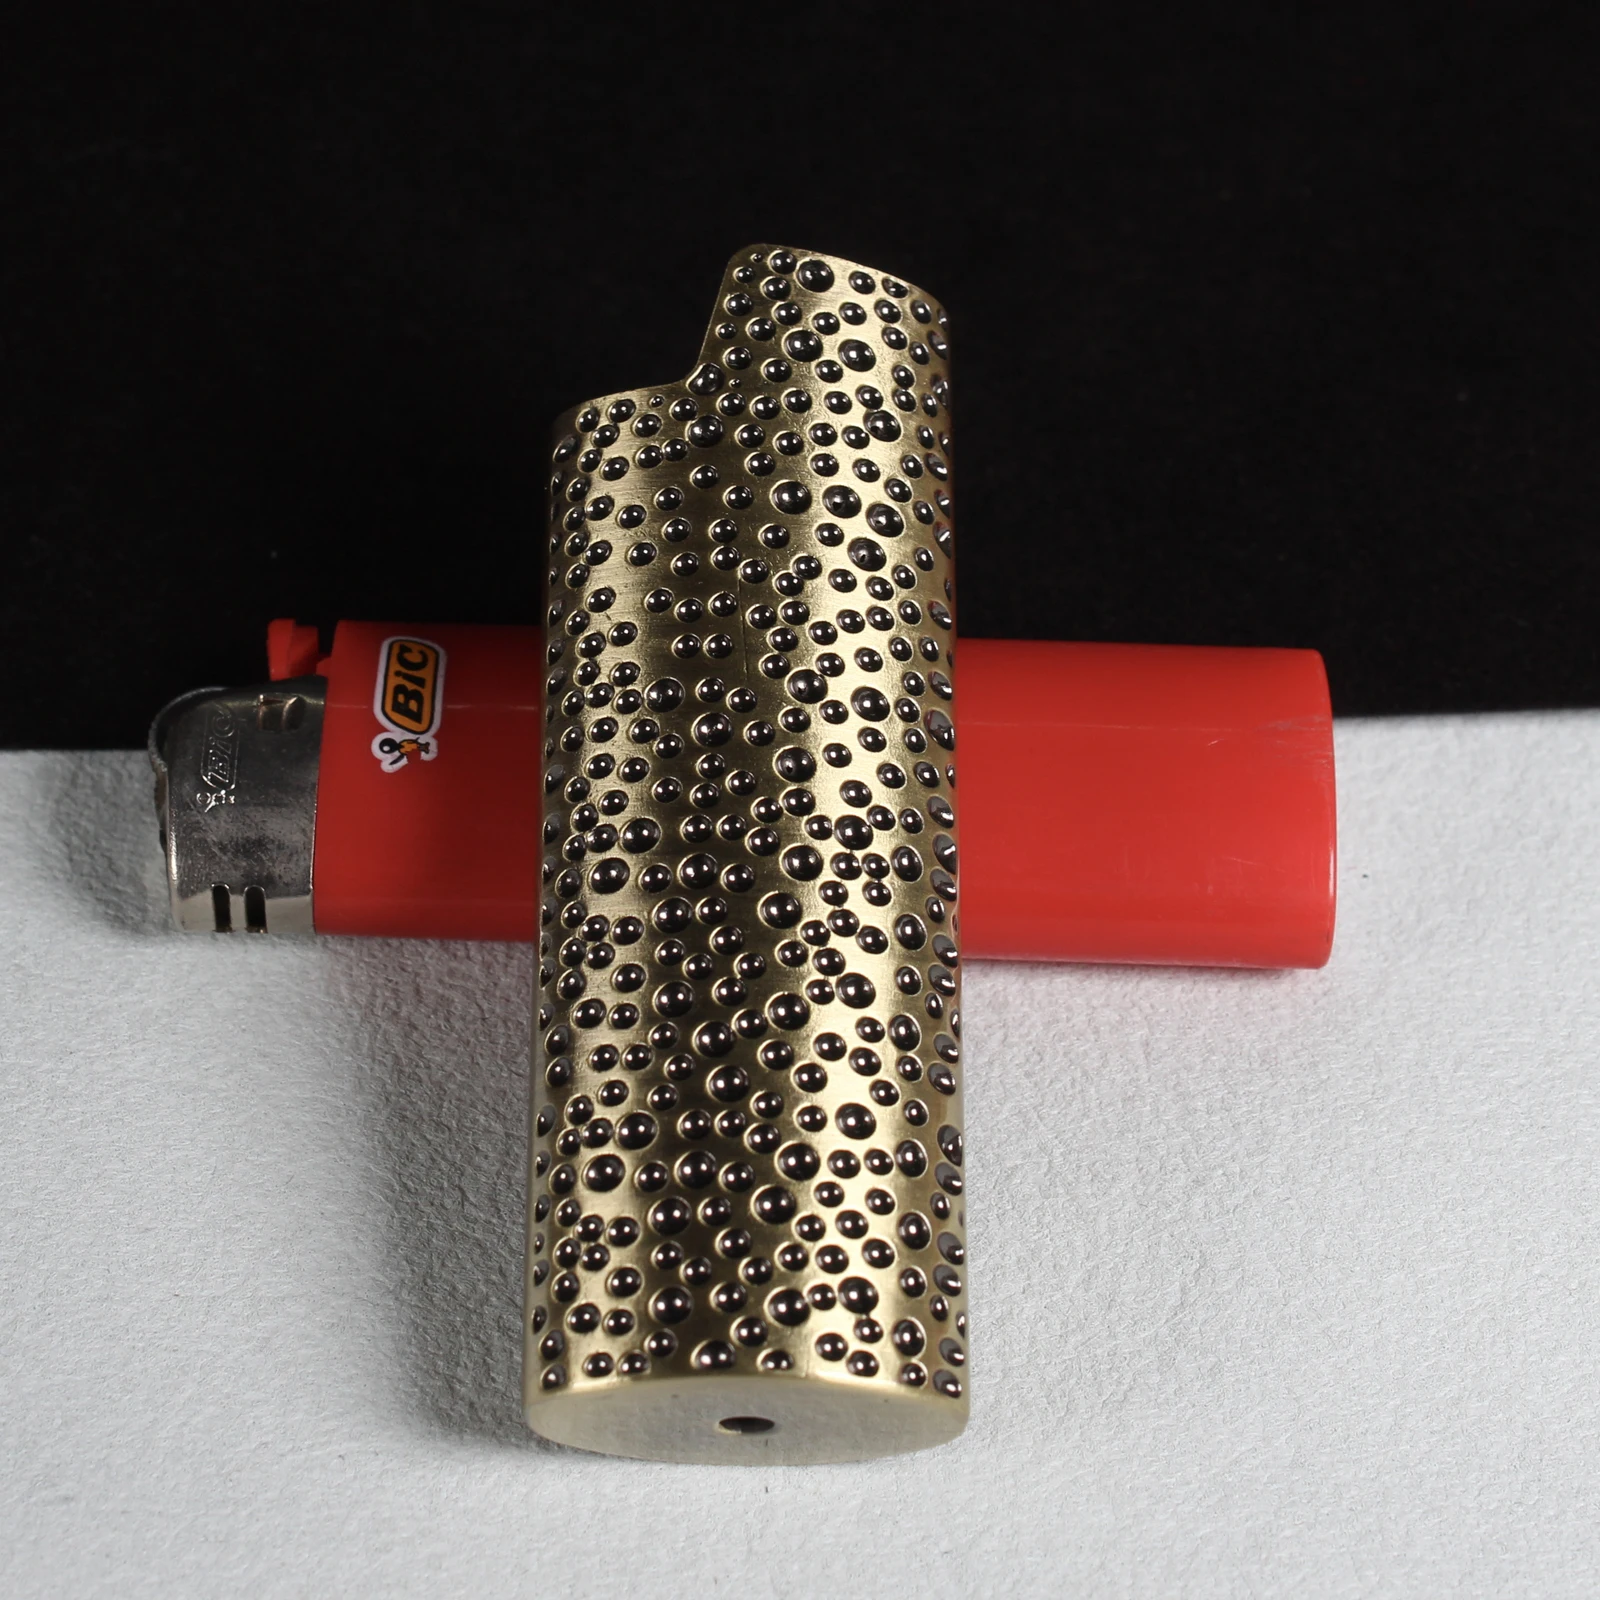 Metal Armor Meteorite Crater J6 Lighter Case Sleeve Holder For Bic Classic  Size Lighter Cover Holder - Cigarette Accessories - AliExpress